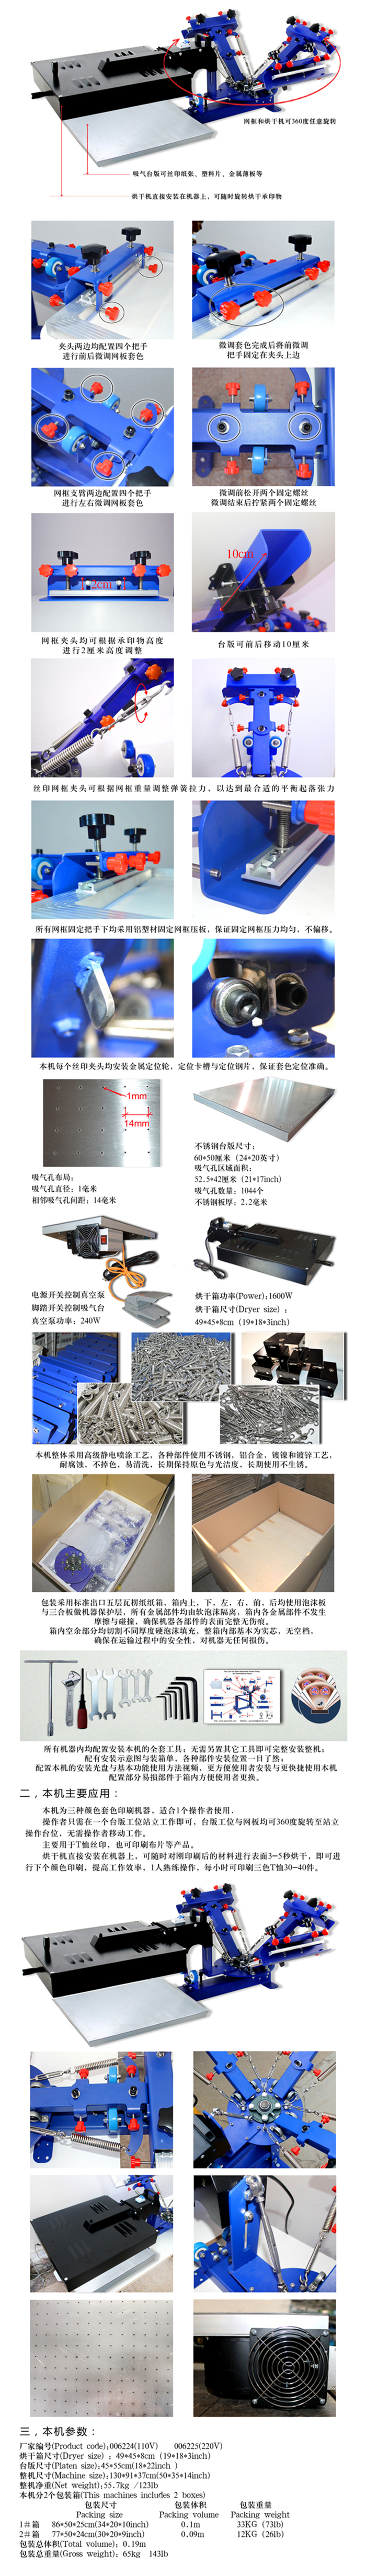 Table Type 3 Color 1 Station Screen Press with Dryer